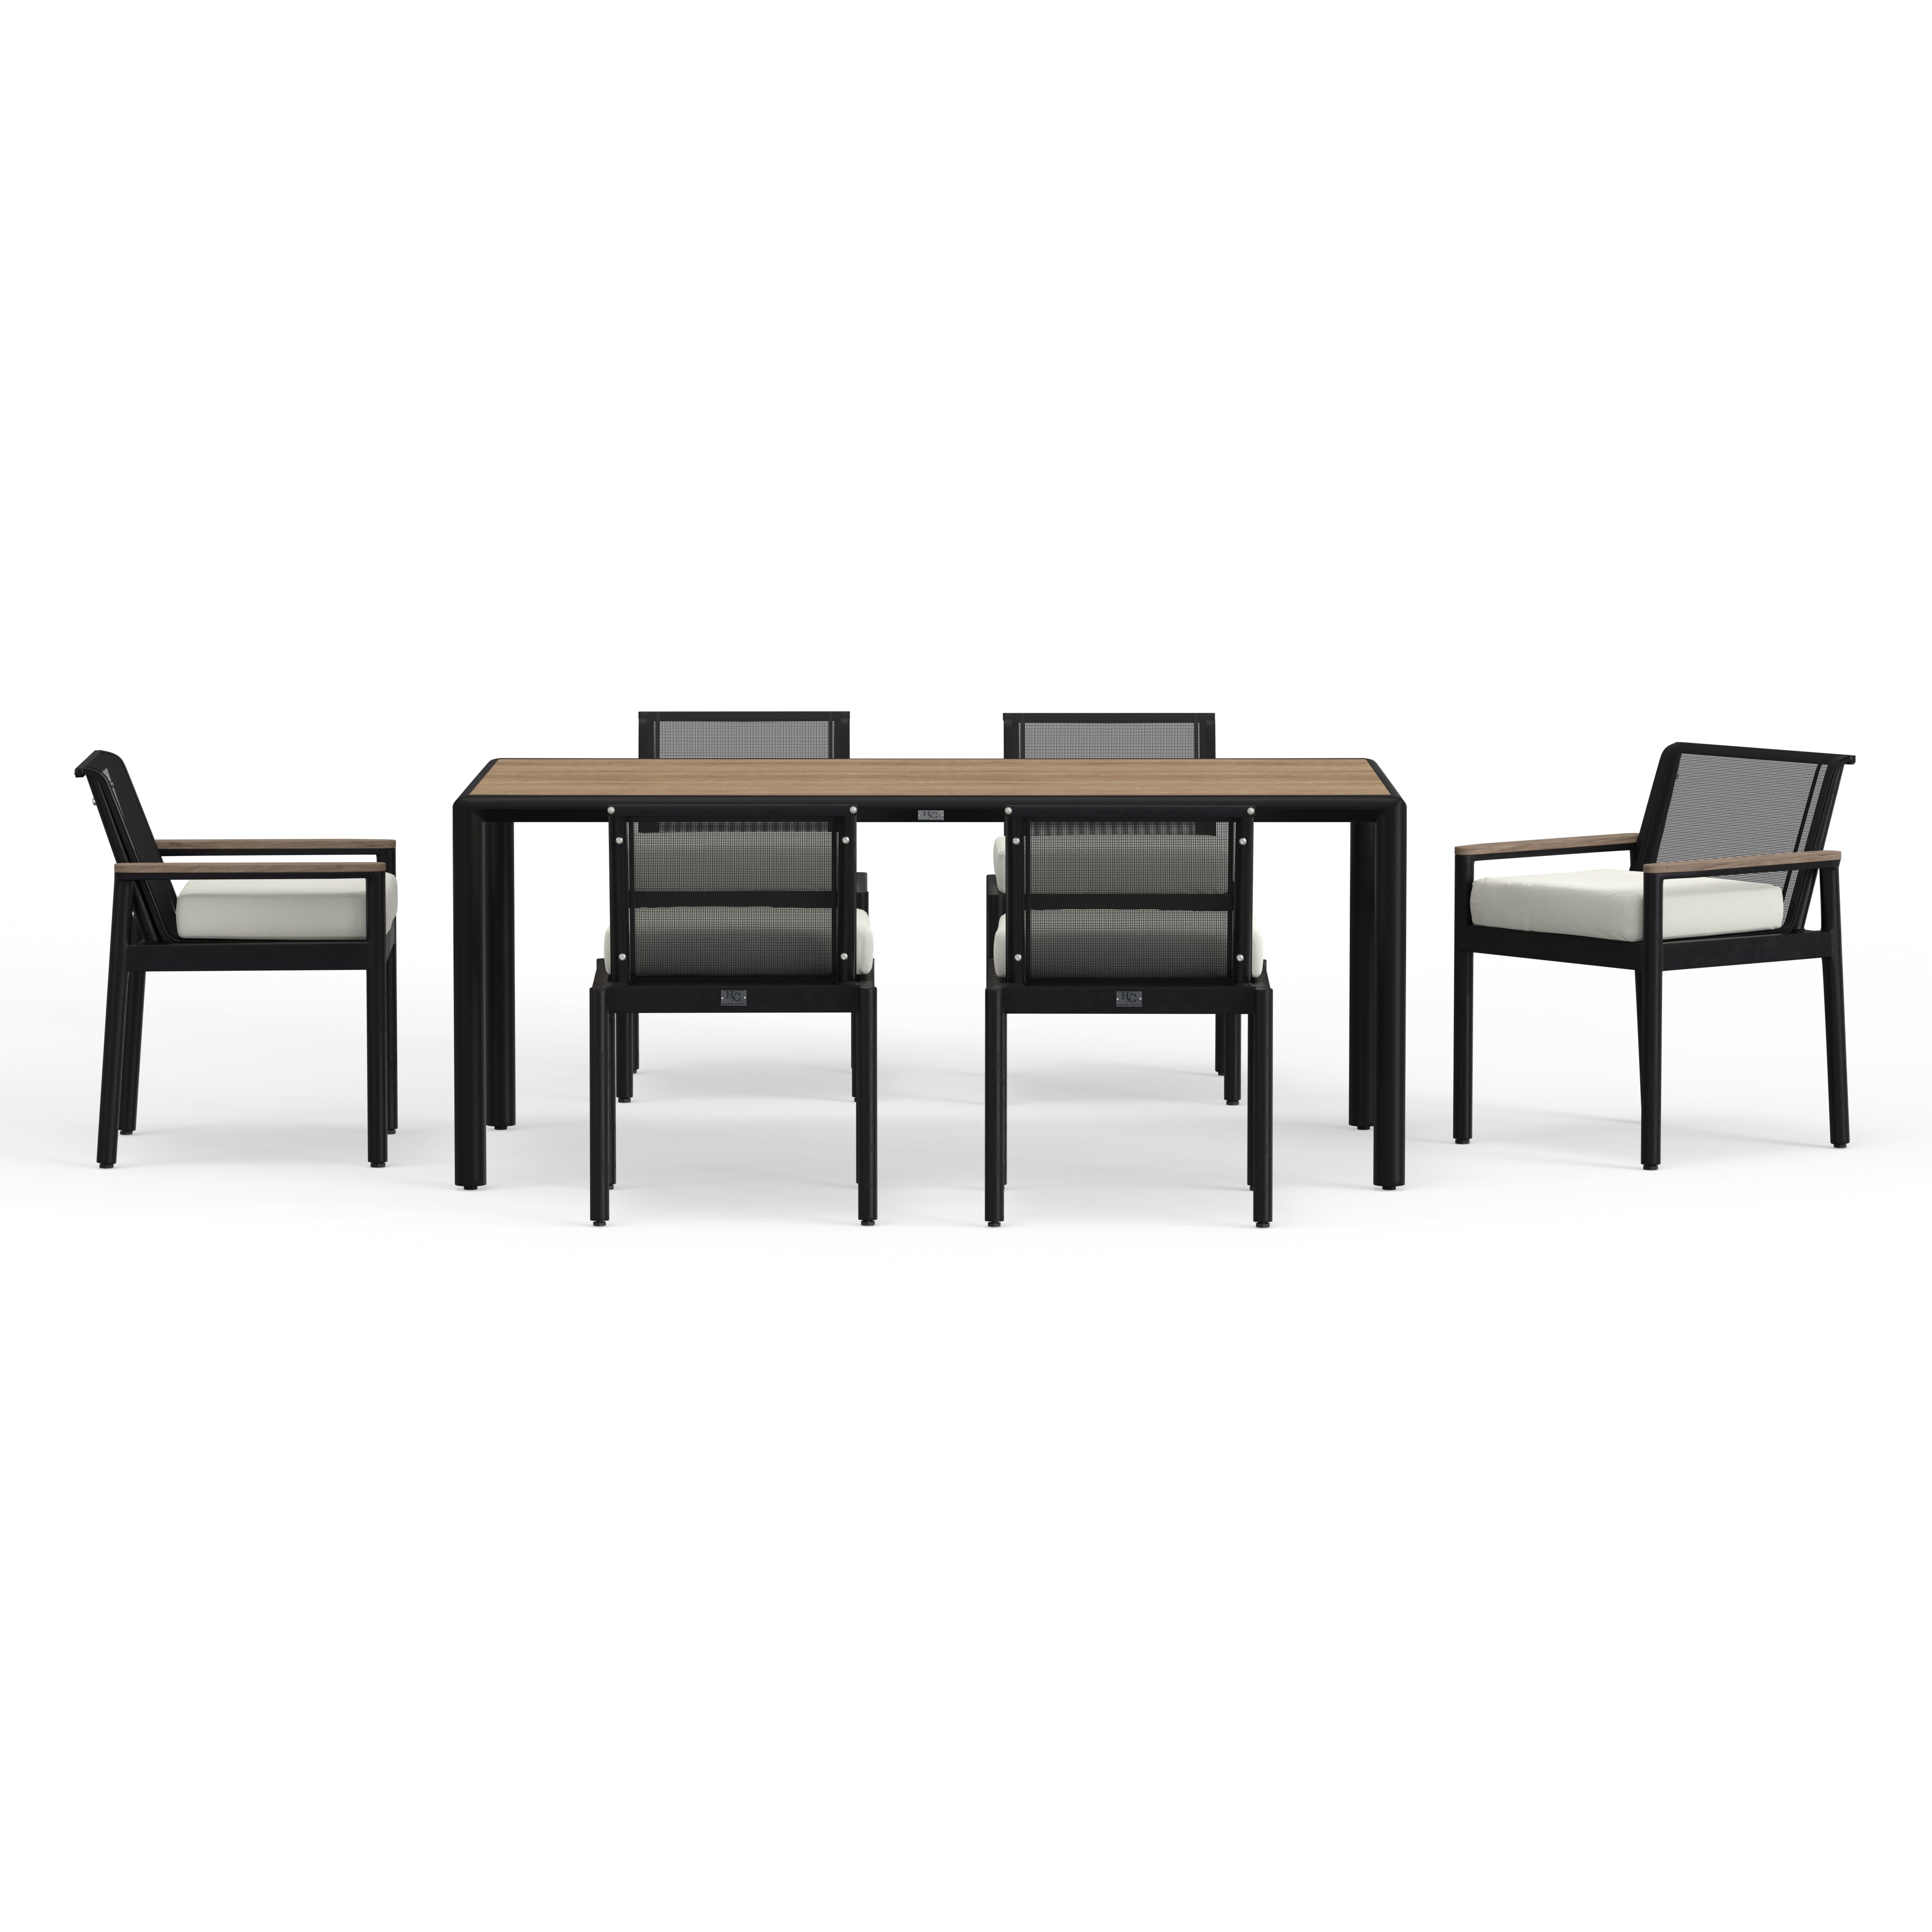 Powder Coated Aluminum Patio Furniture - Black Outdoor Dining Chair